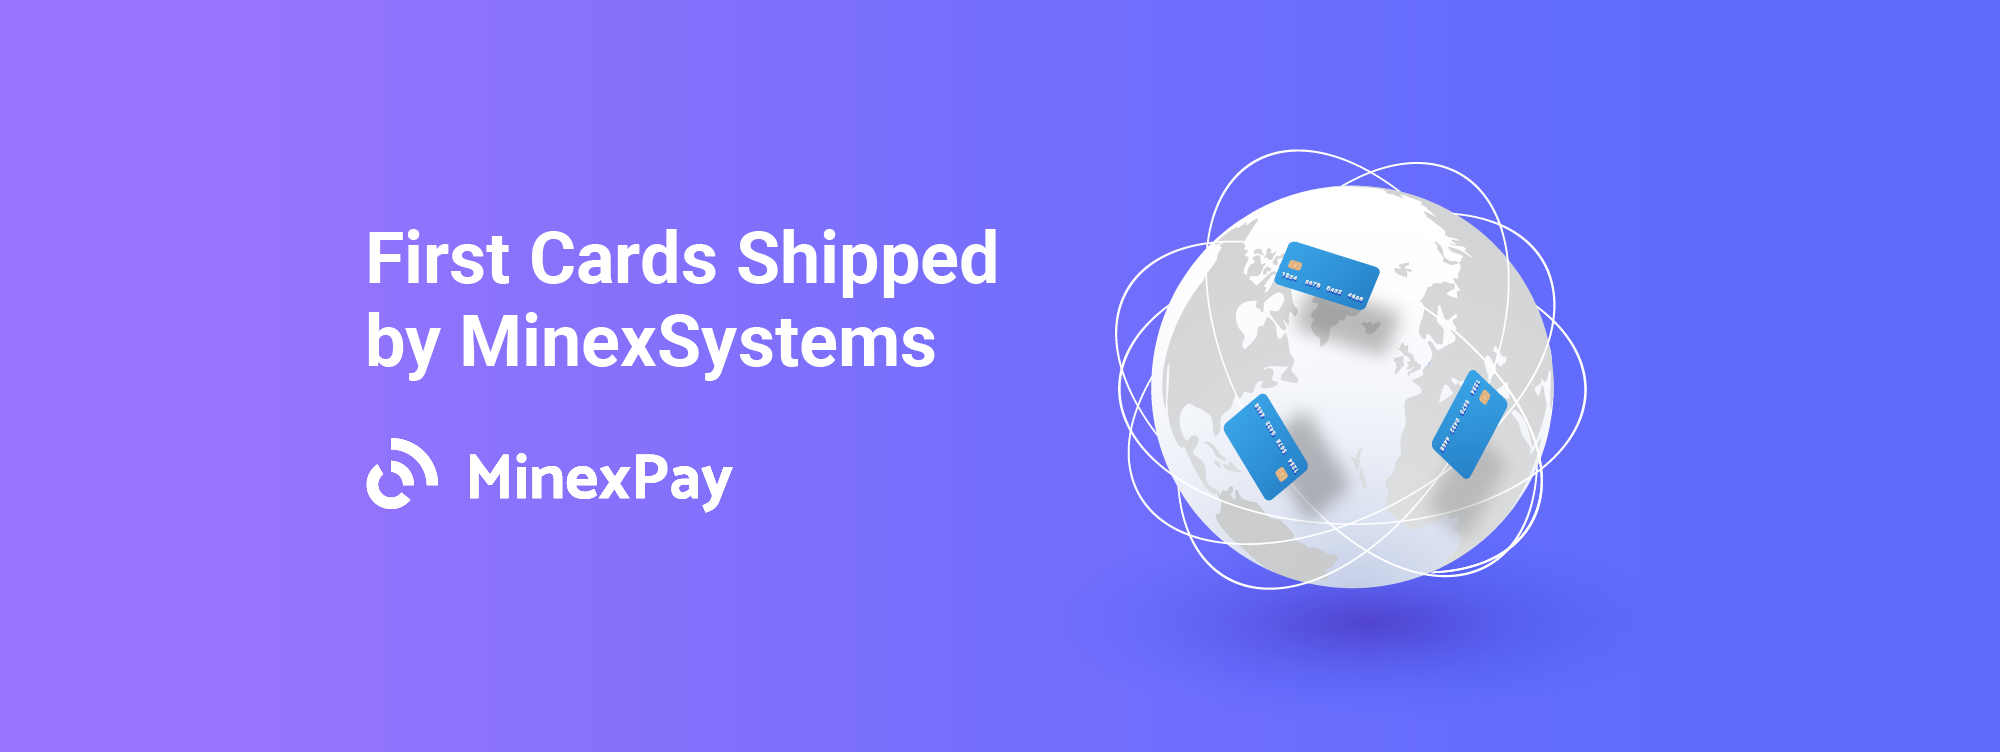 MinexSystems Ships the Crypto Cards with Global Coverage and Cash-Out Starting at 0%